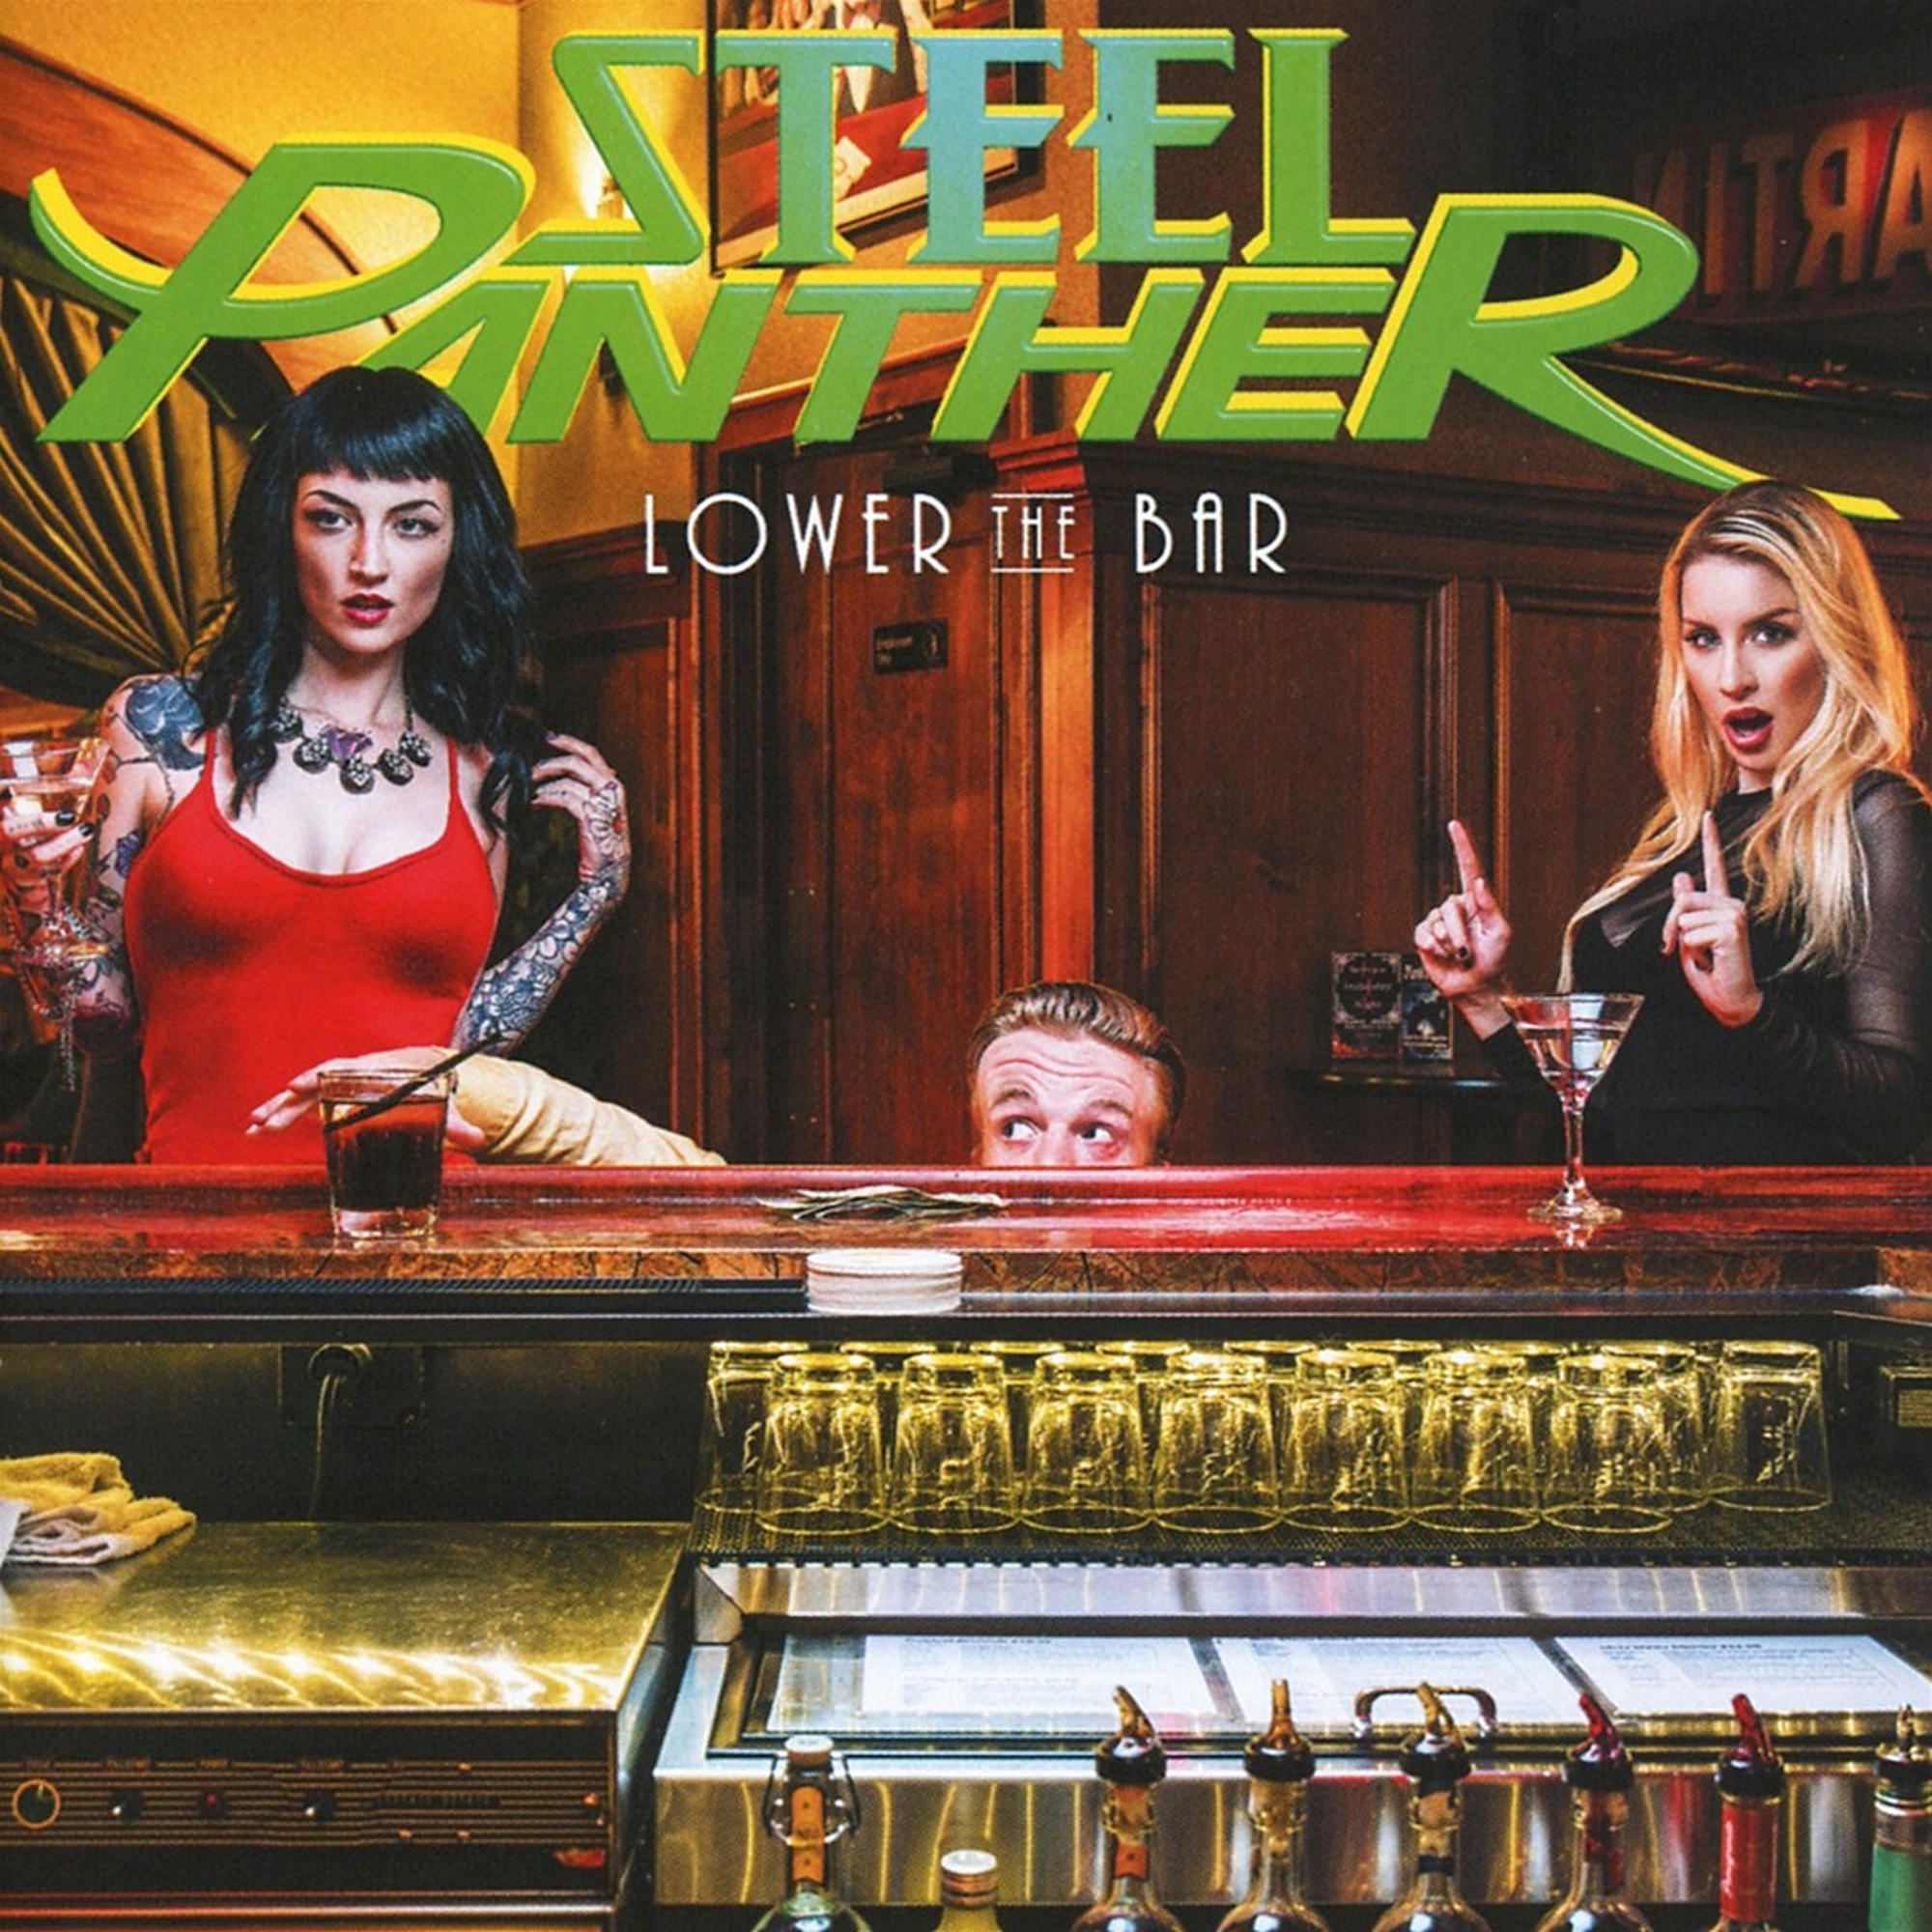 - THE (DELUXE Panther (CD) Steel LOWER - BAR EDITION)